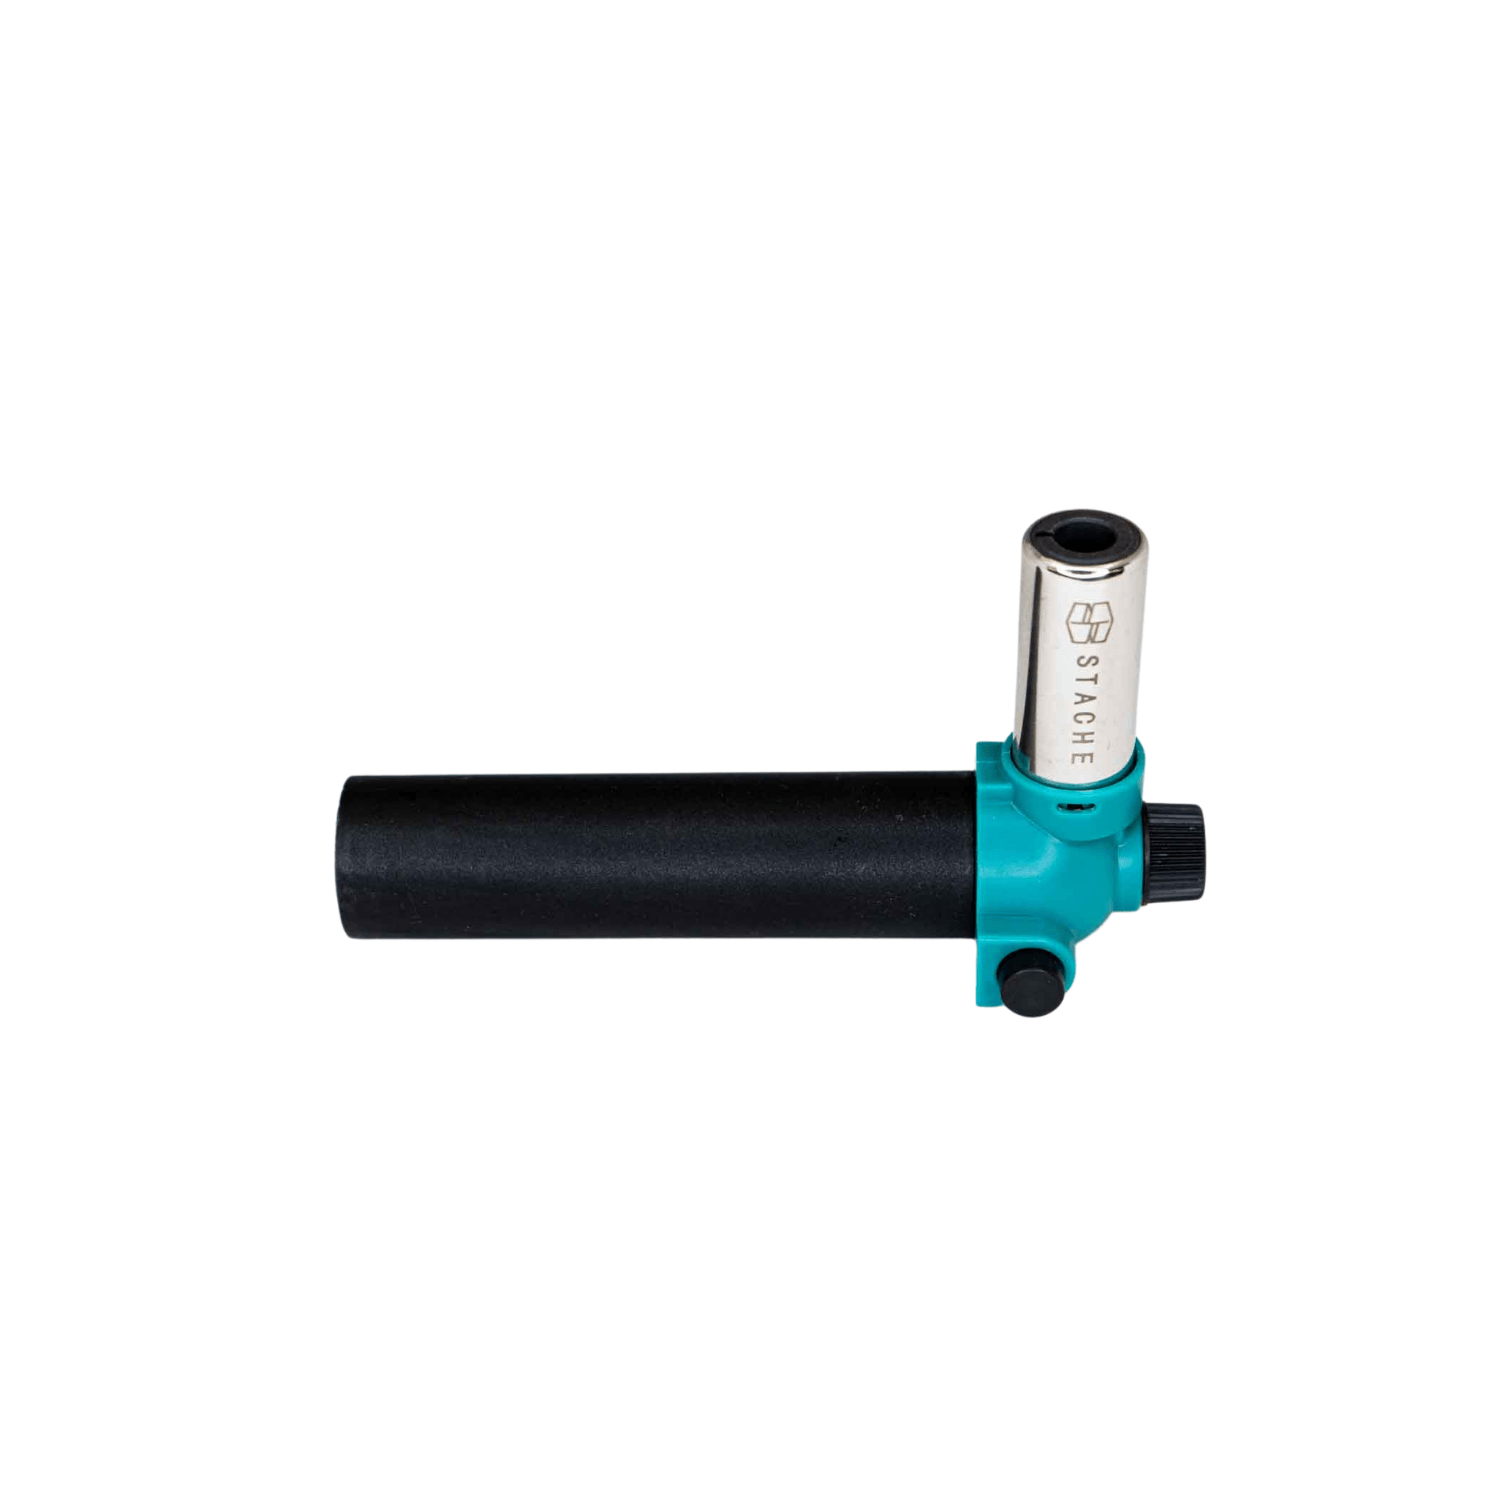 Teal Stache RiO Replacement Torch (Makeover or Matte)